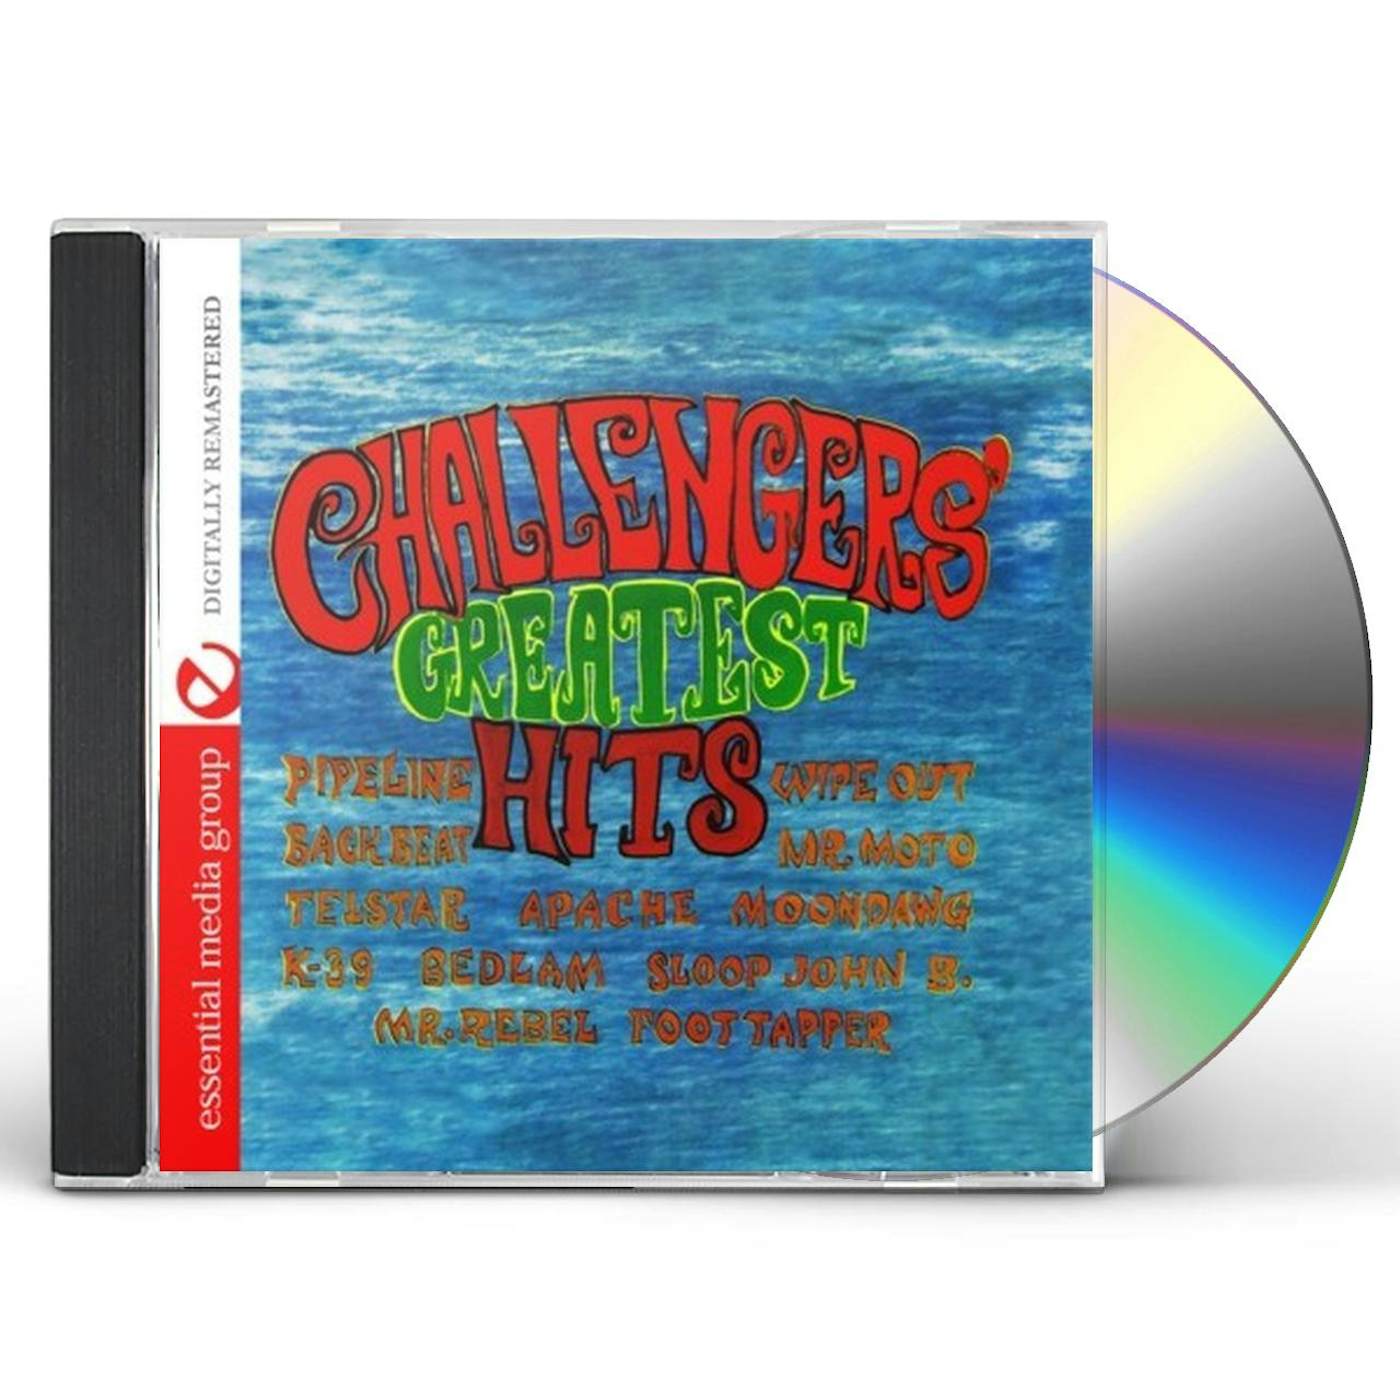 The Challengers' GREATEST HITS CD